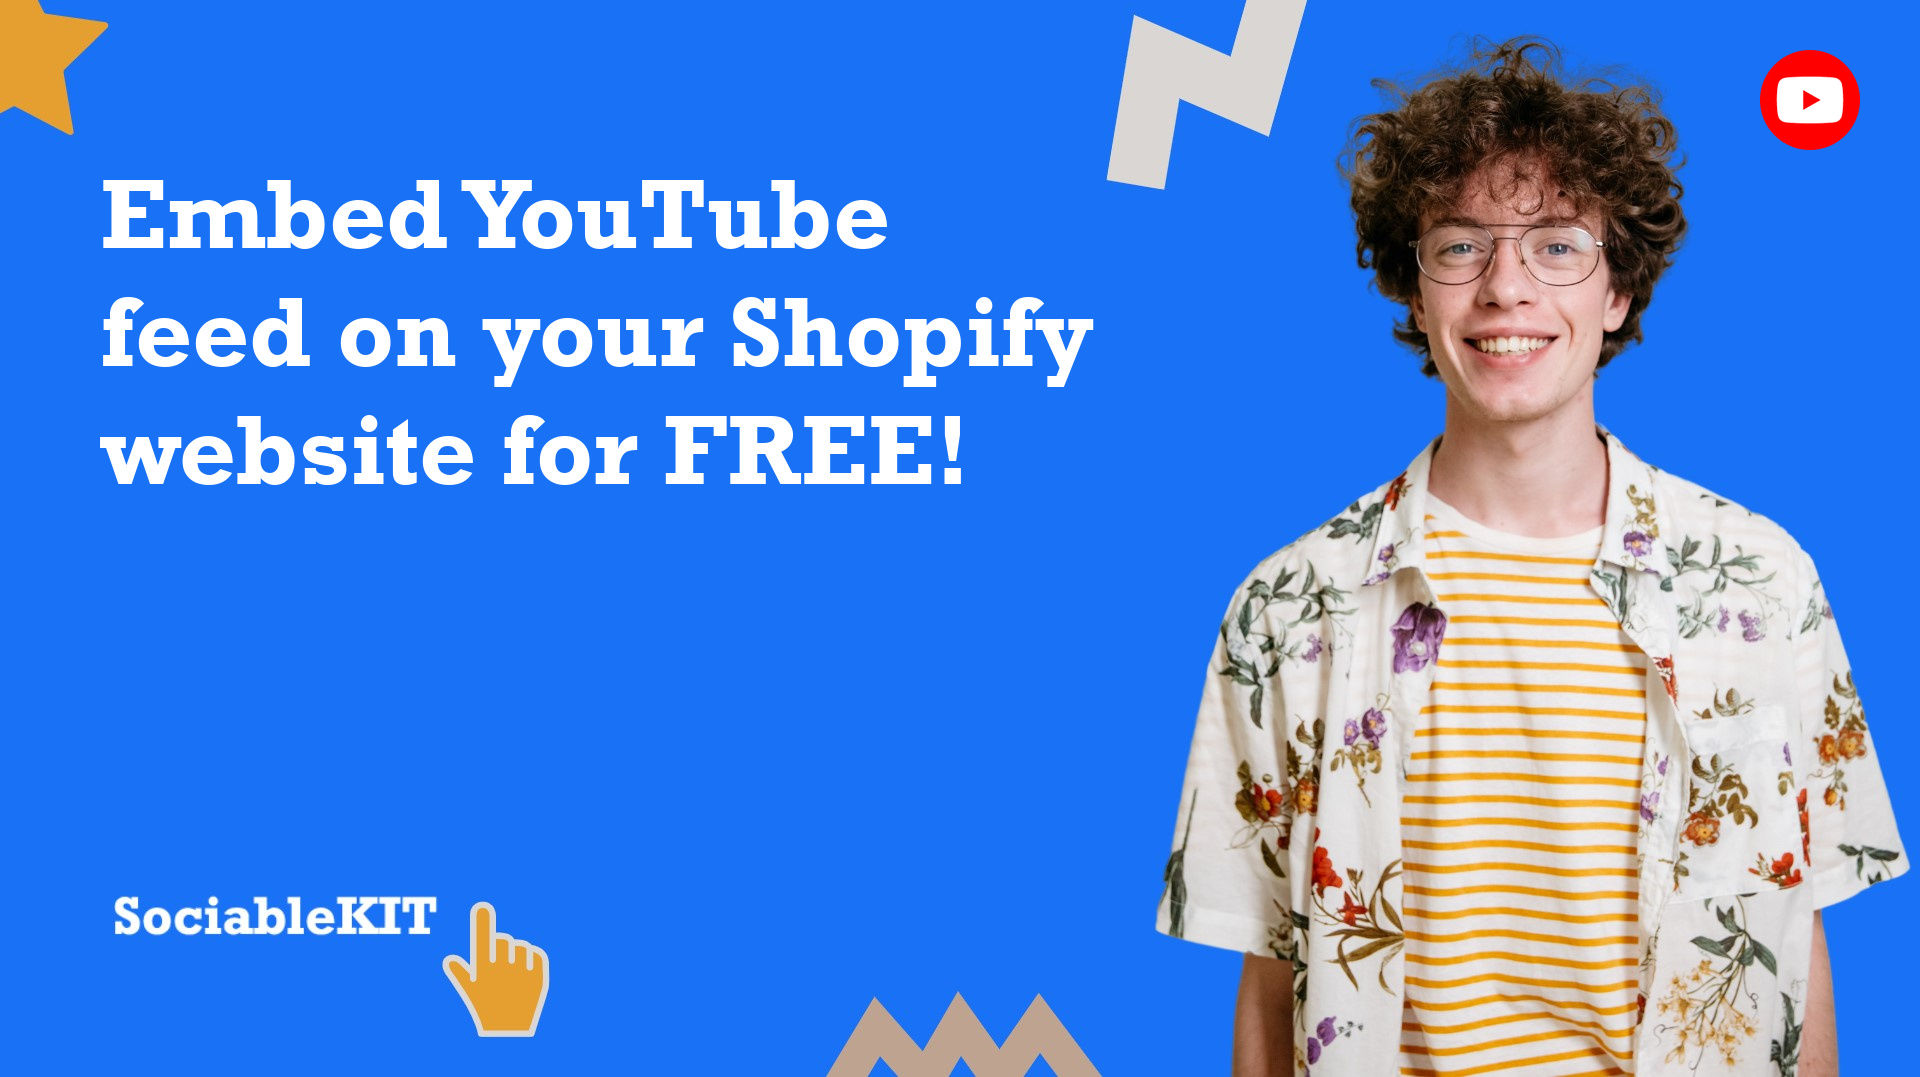 How to embed YouTube feed on your Shopify website for FREE?